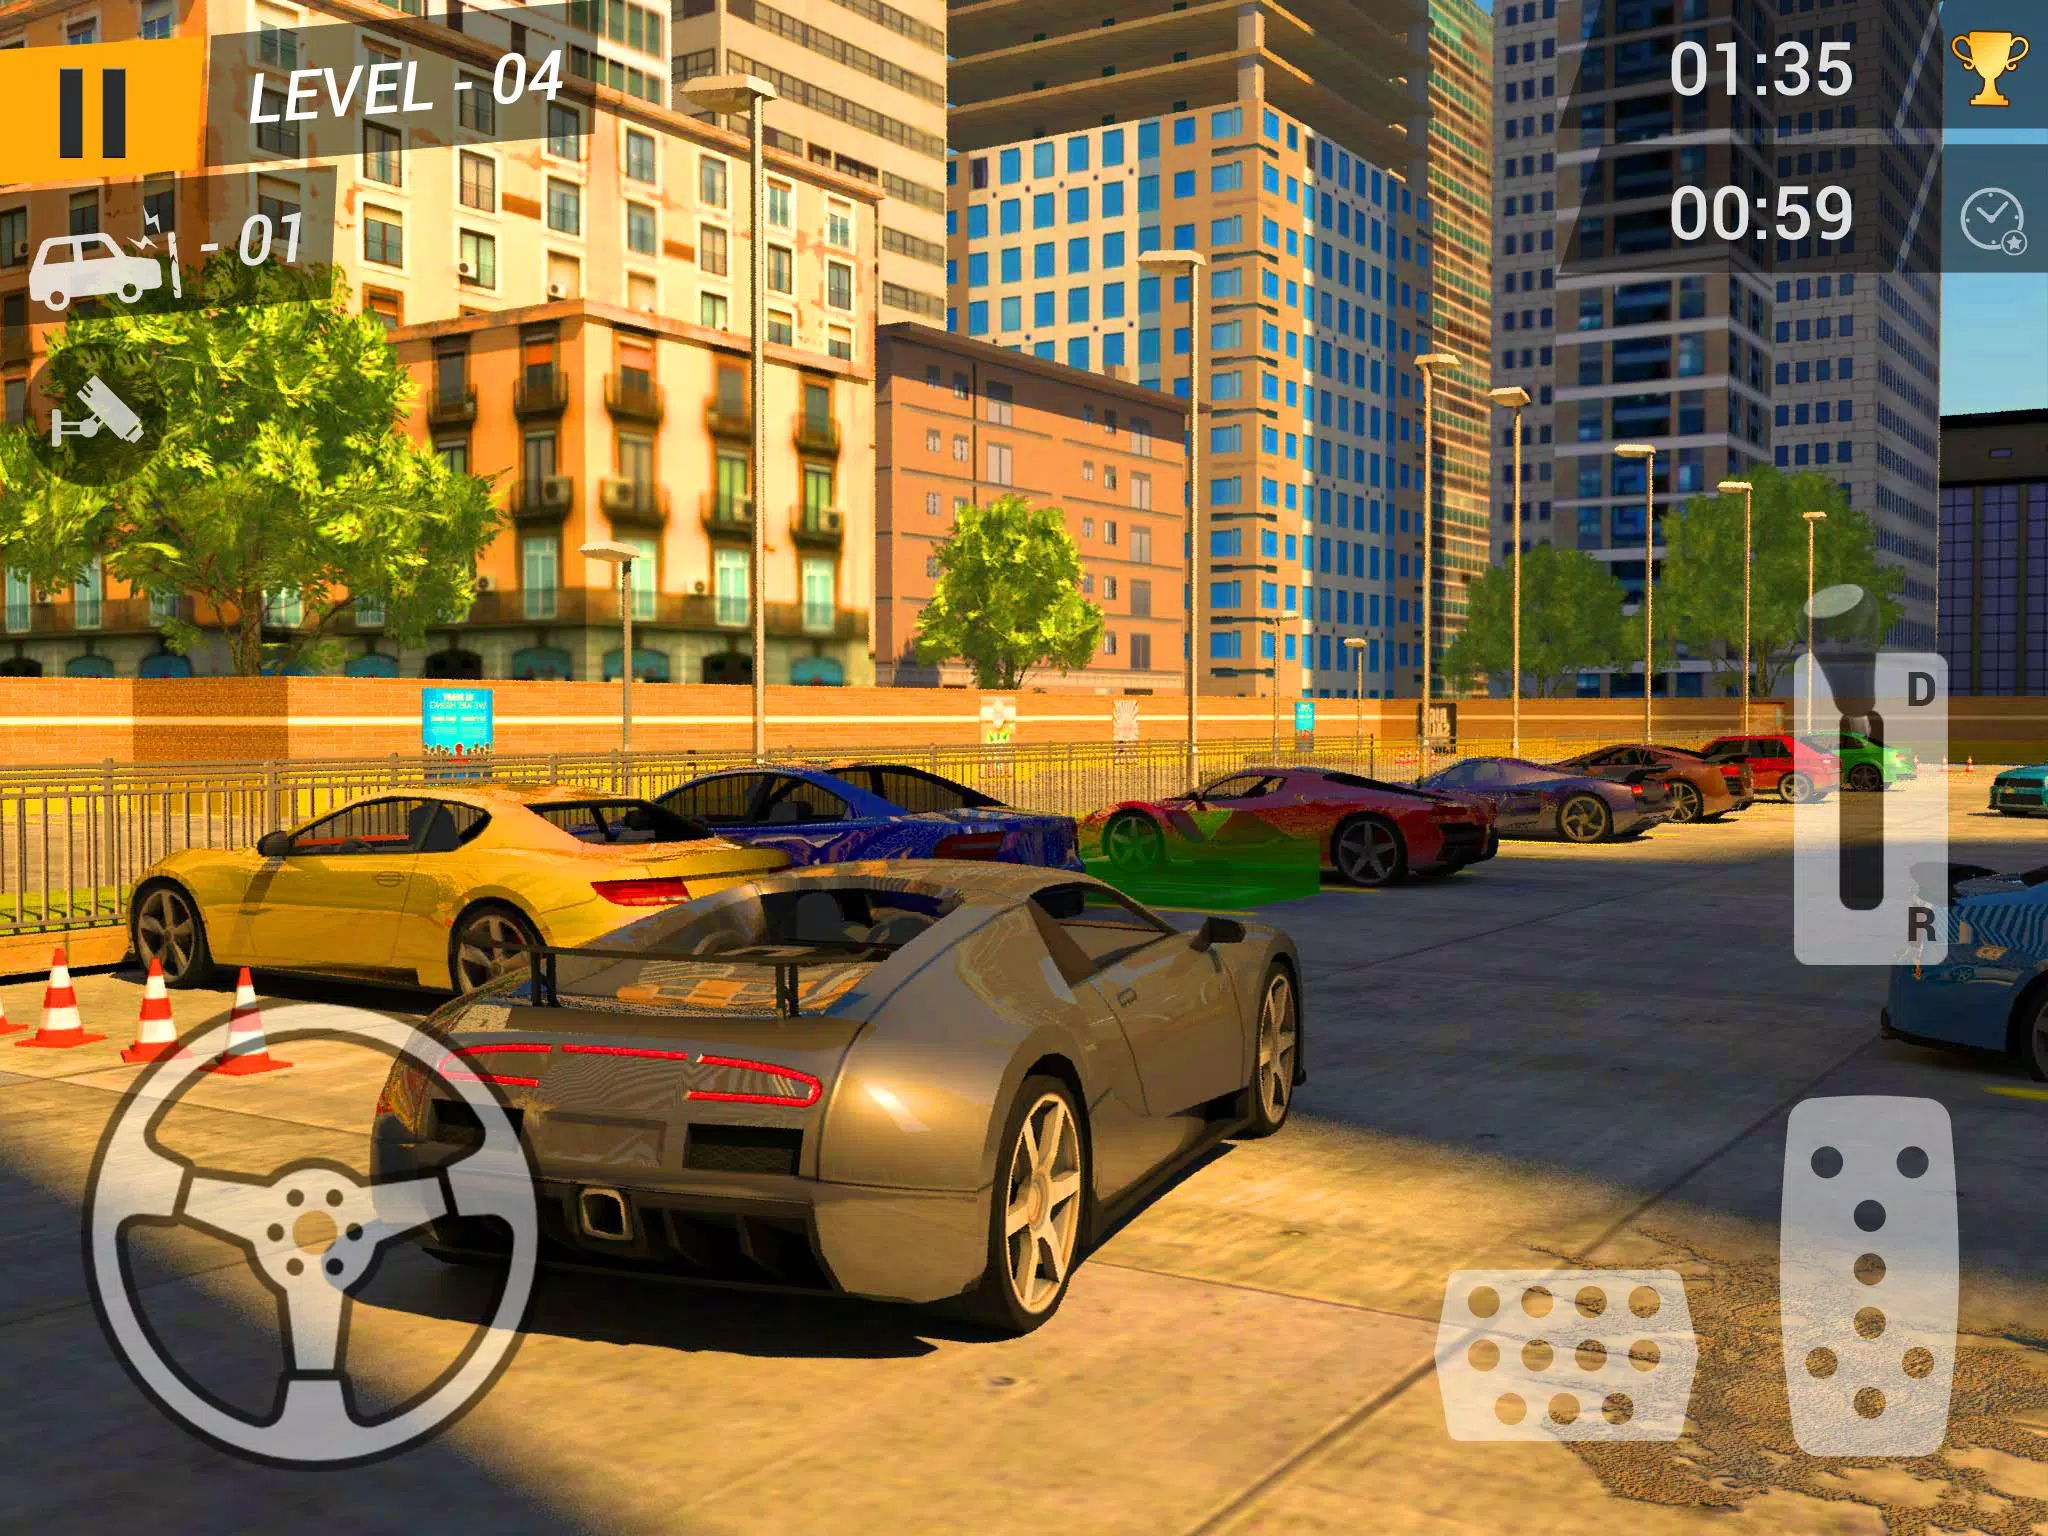 Parking Car - APK Download for Android